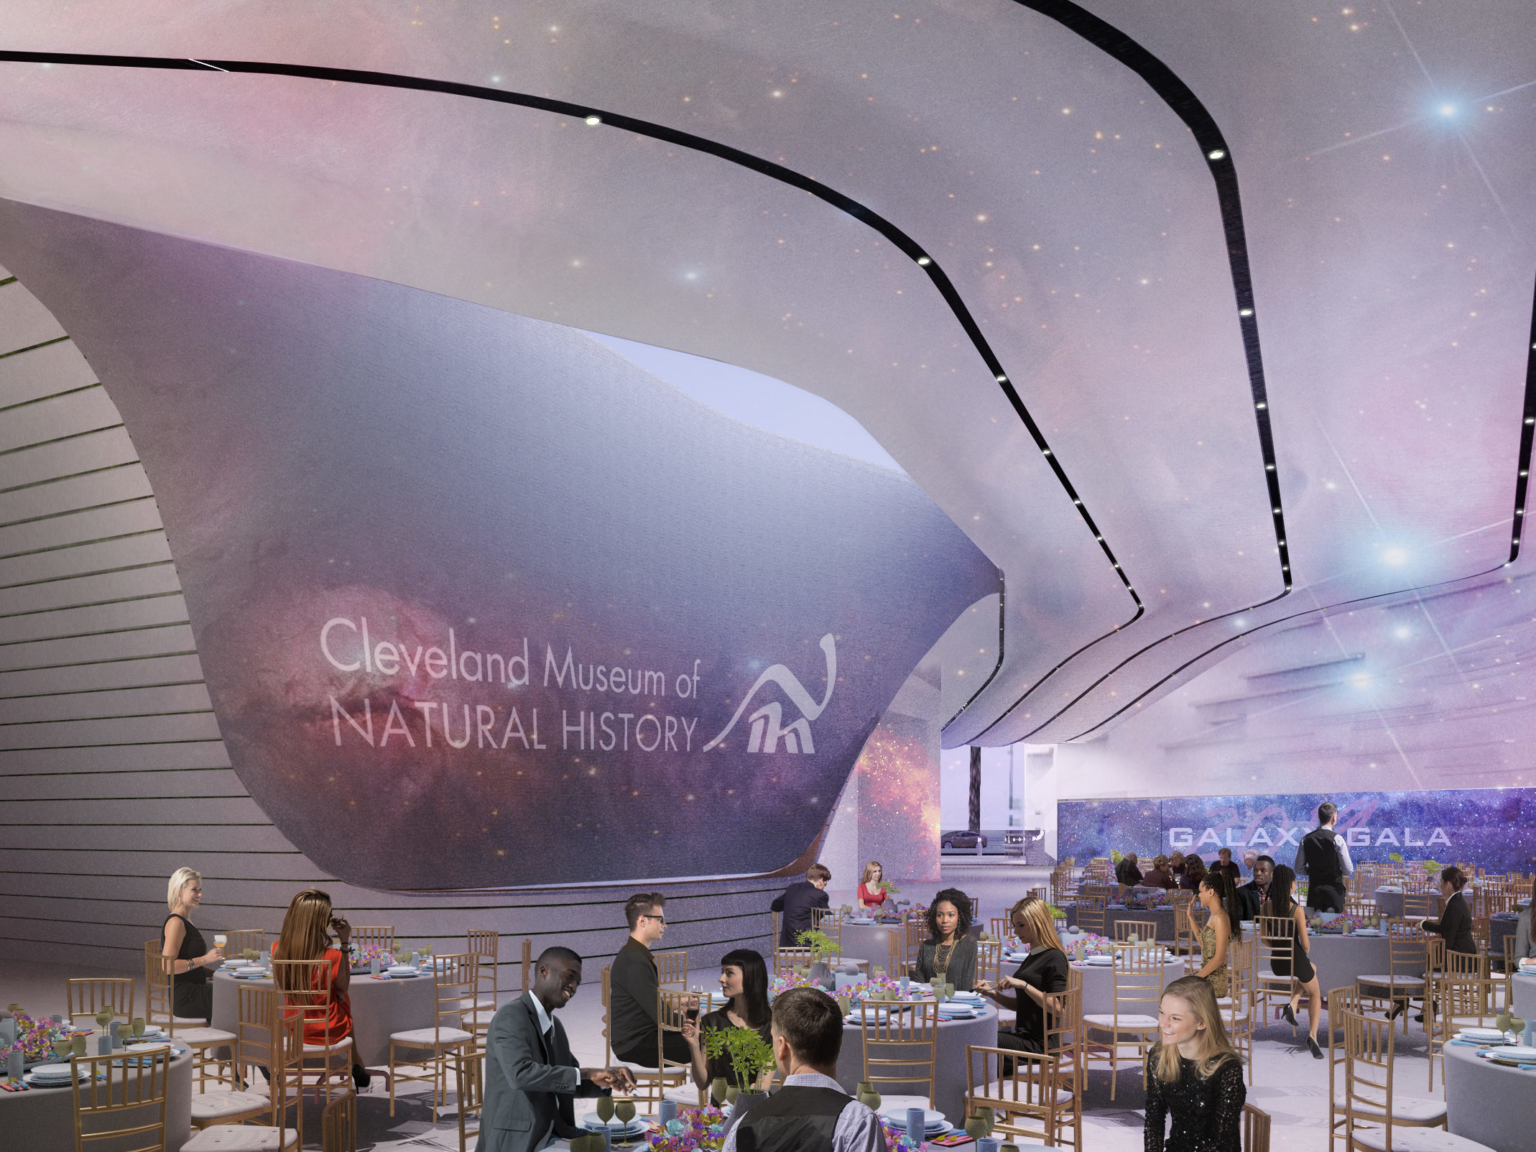 rendering of interior gala with people around tables with purple lighting and Cleveland Museum of Natural History Sign